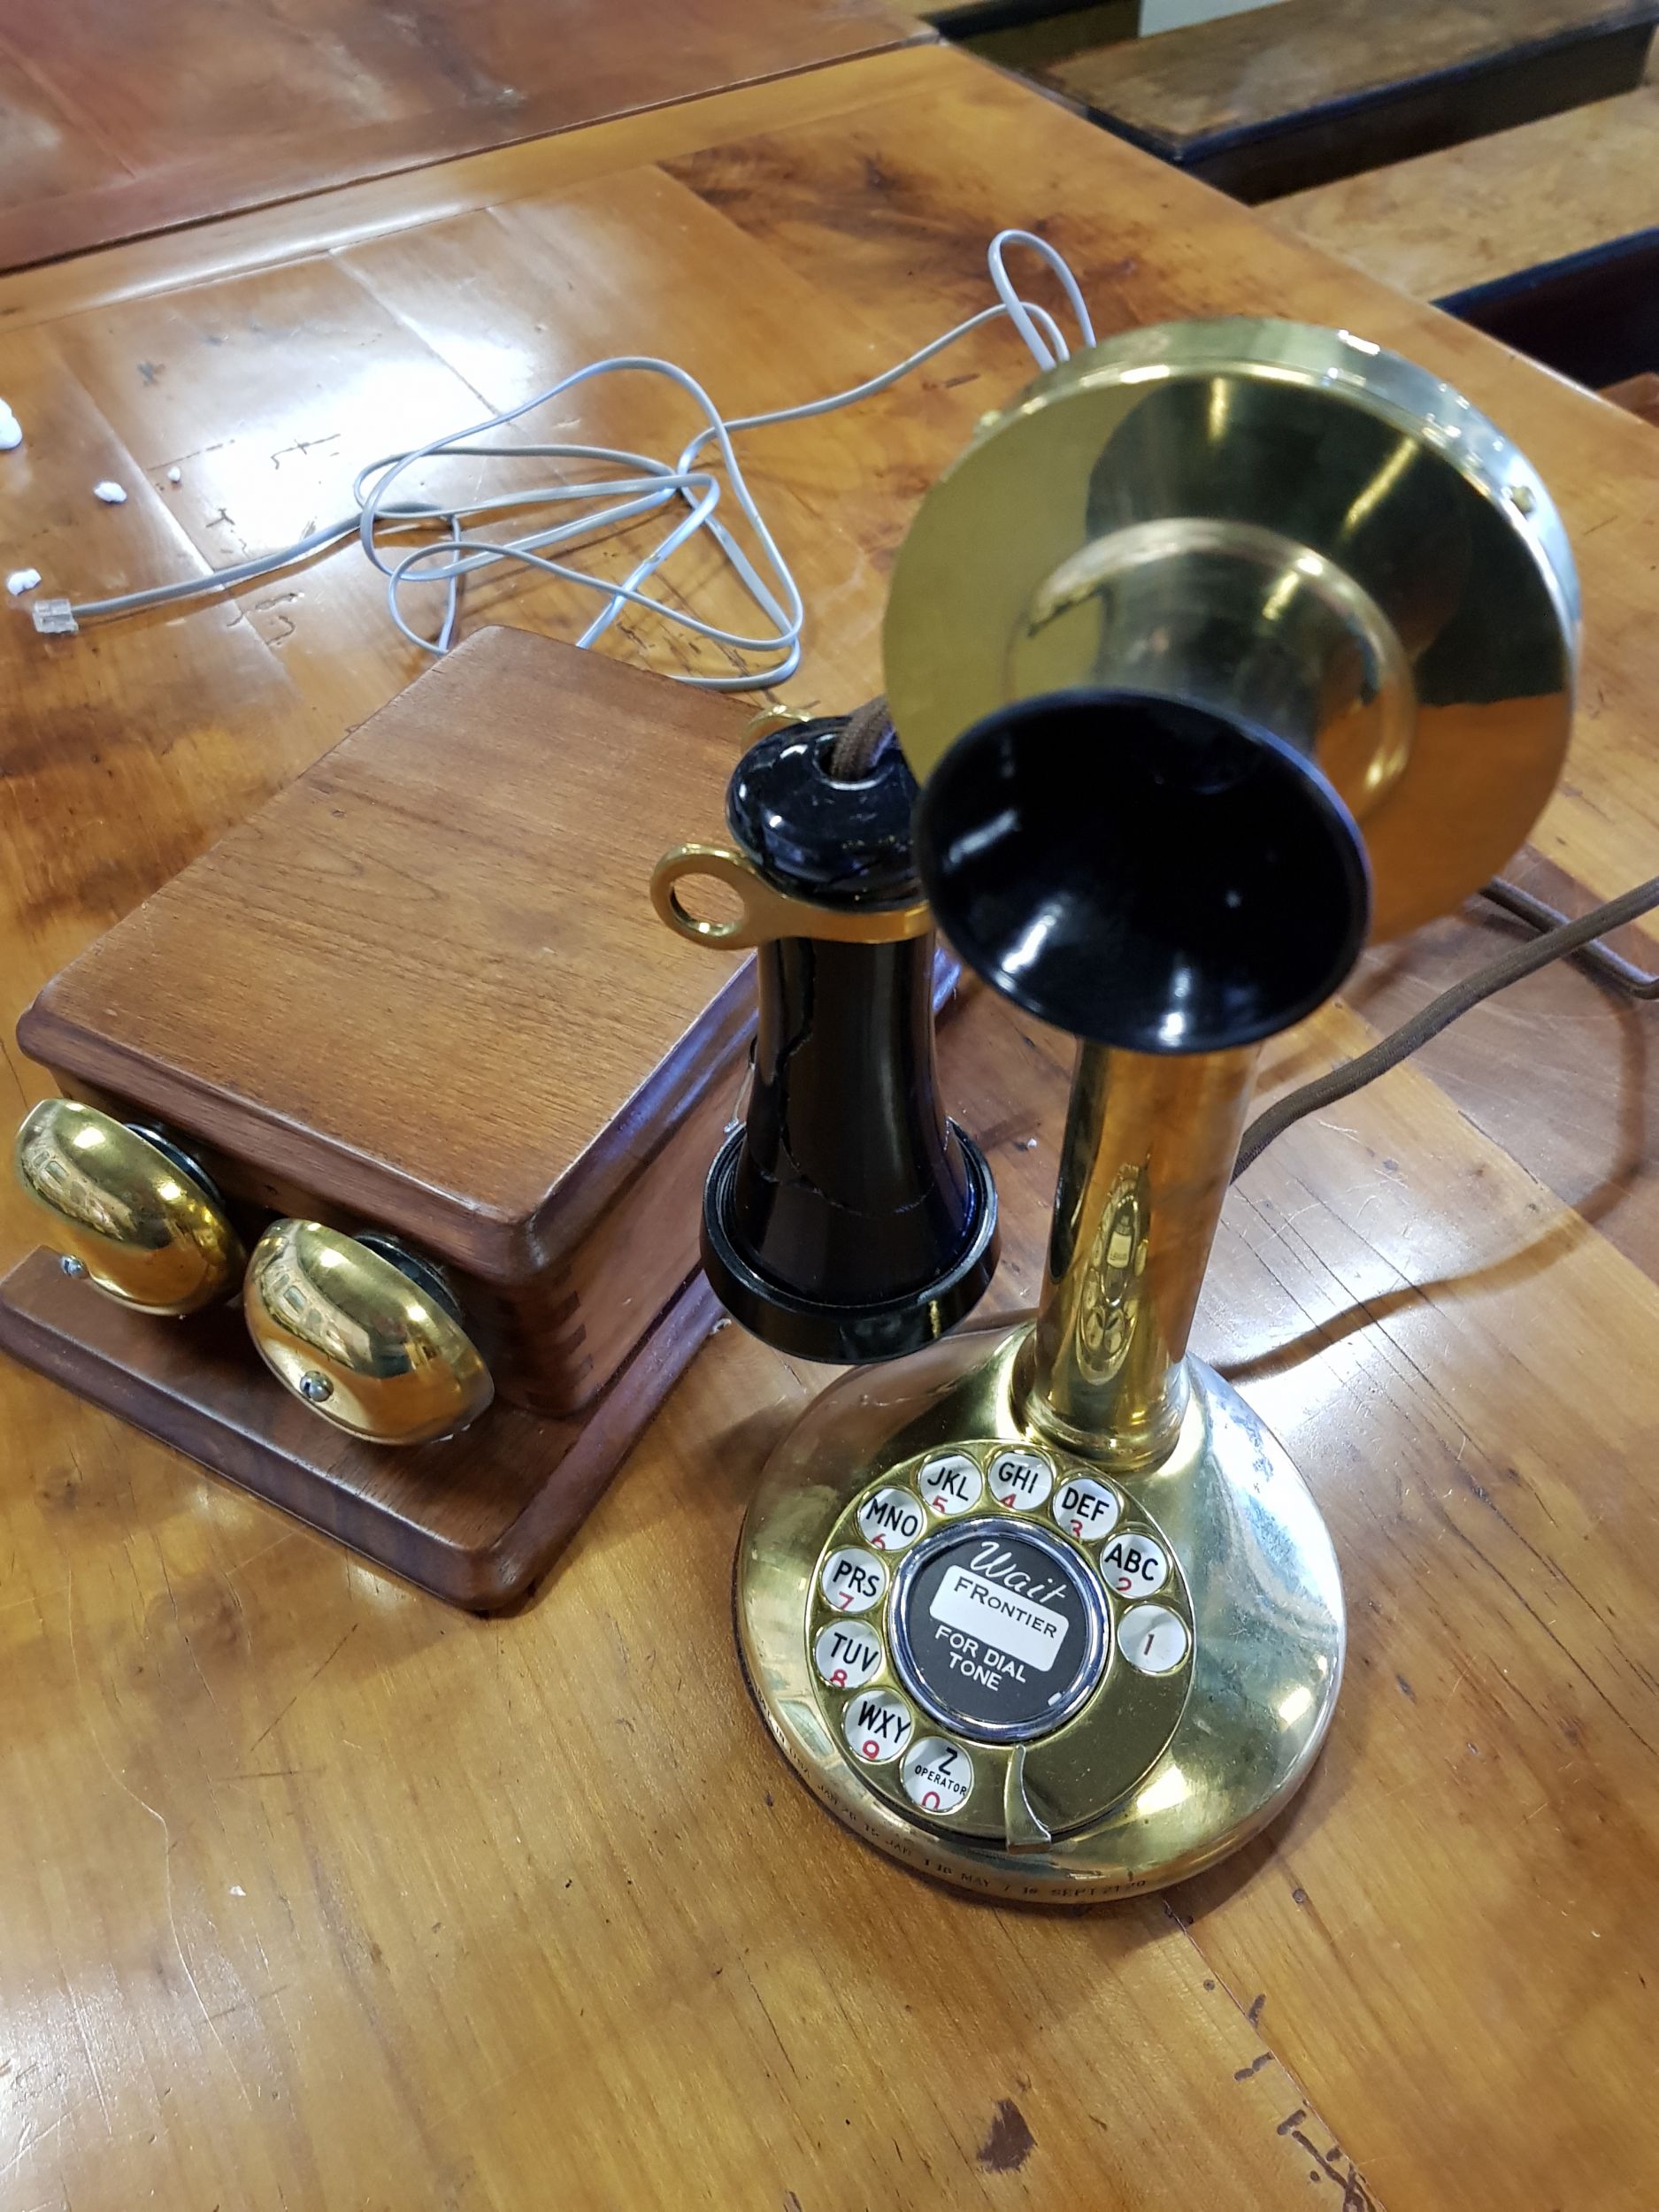 An old Telephone with a separate Ringbox